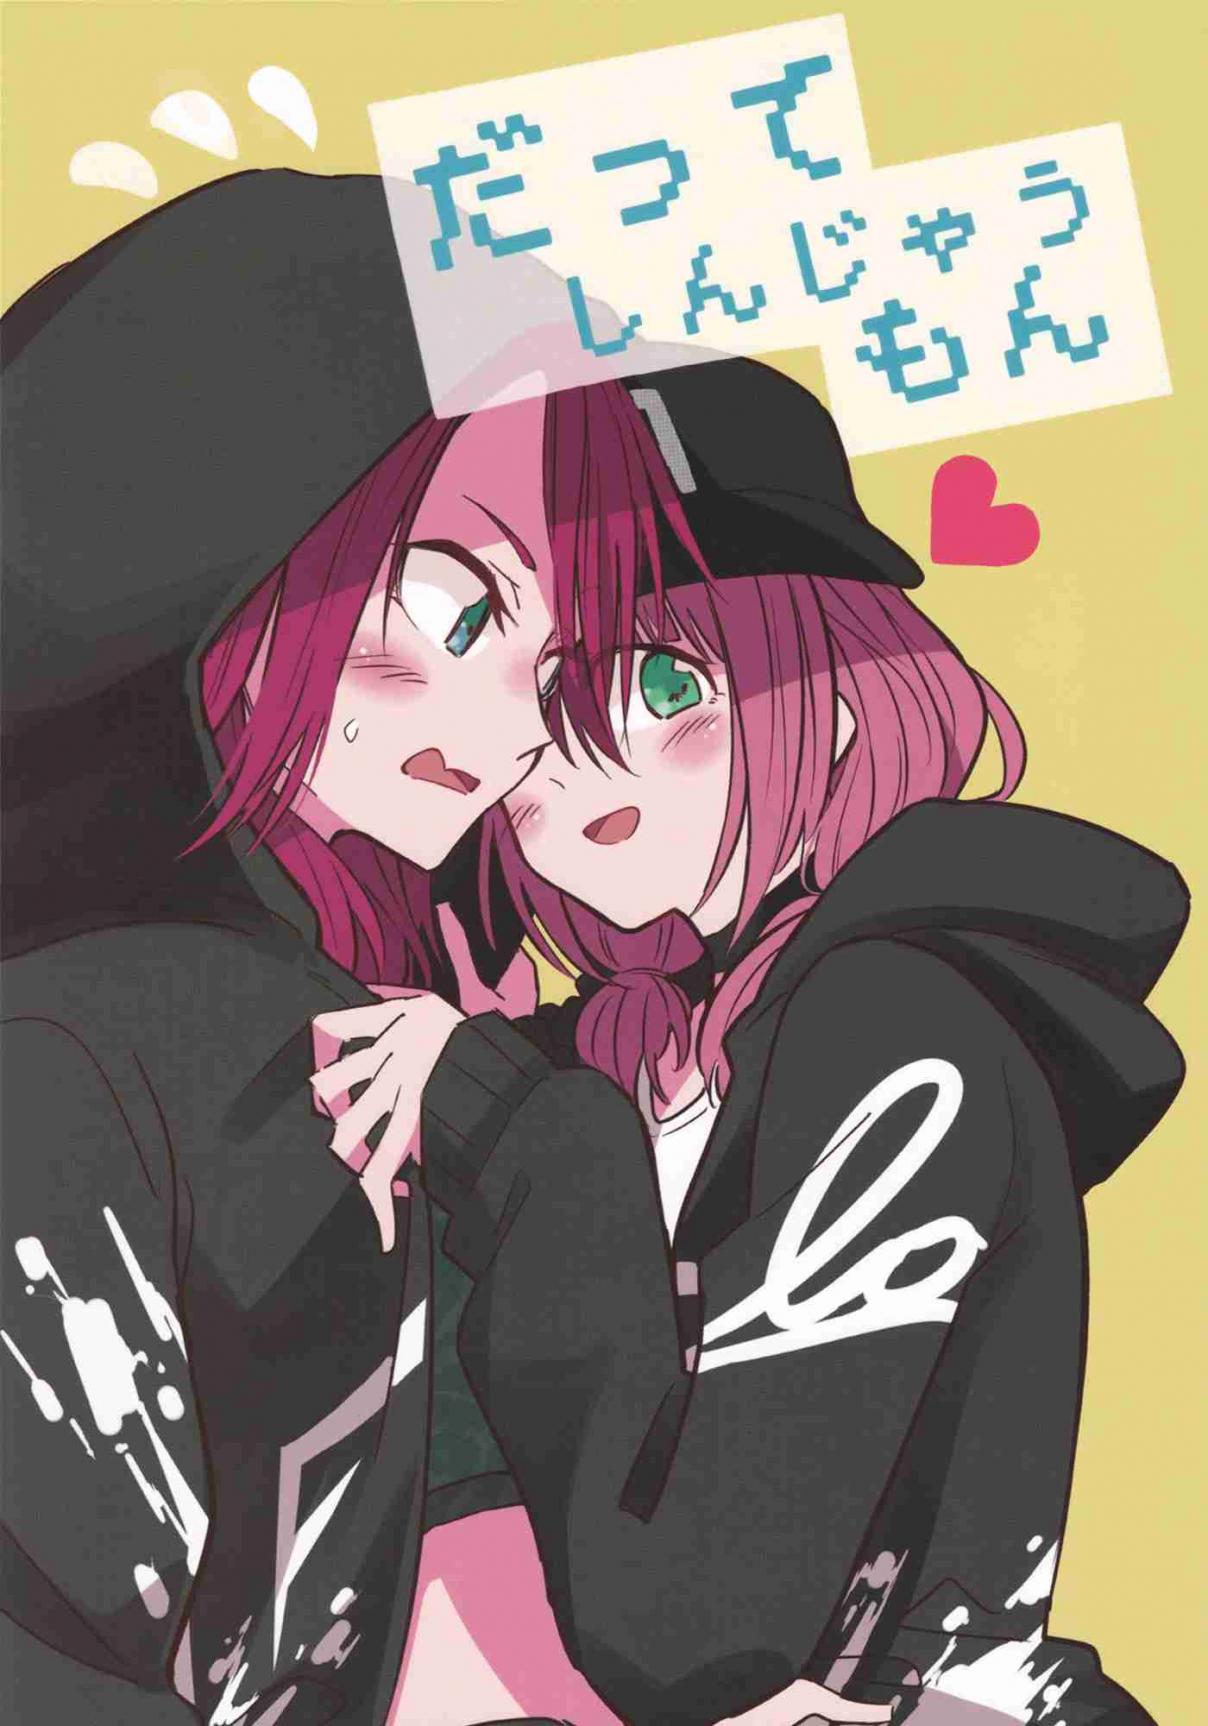 BanG Dream! I Might As Well Die (Doujinshi) Oneshot